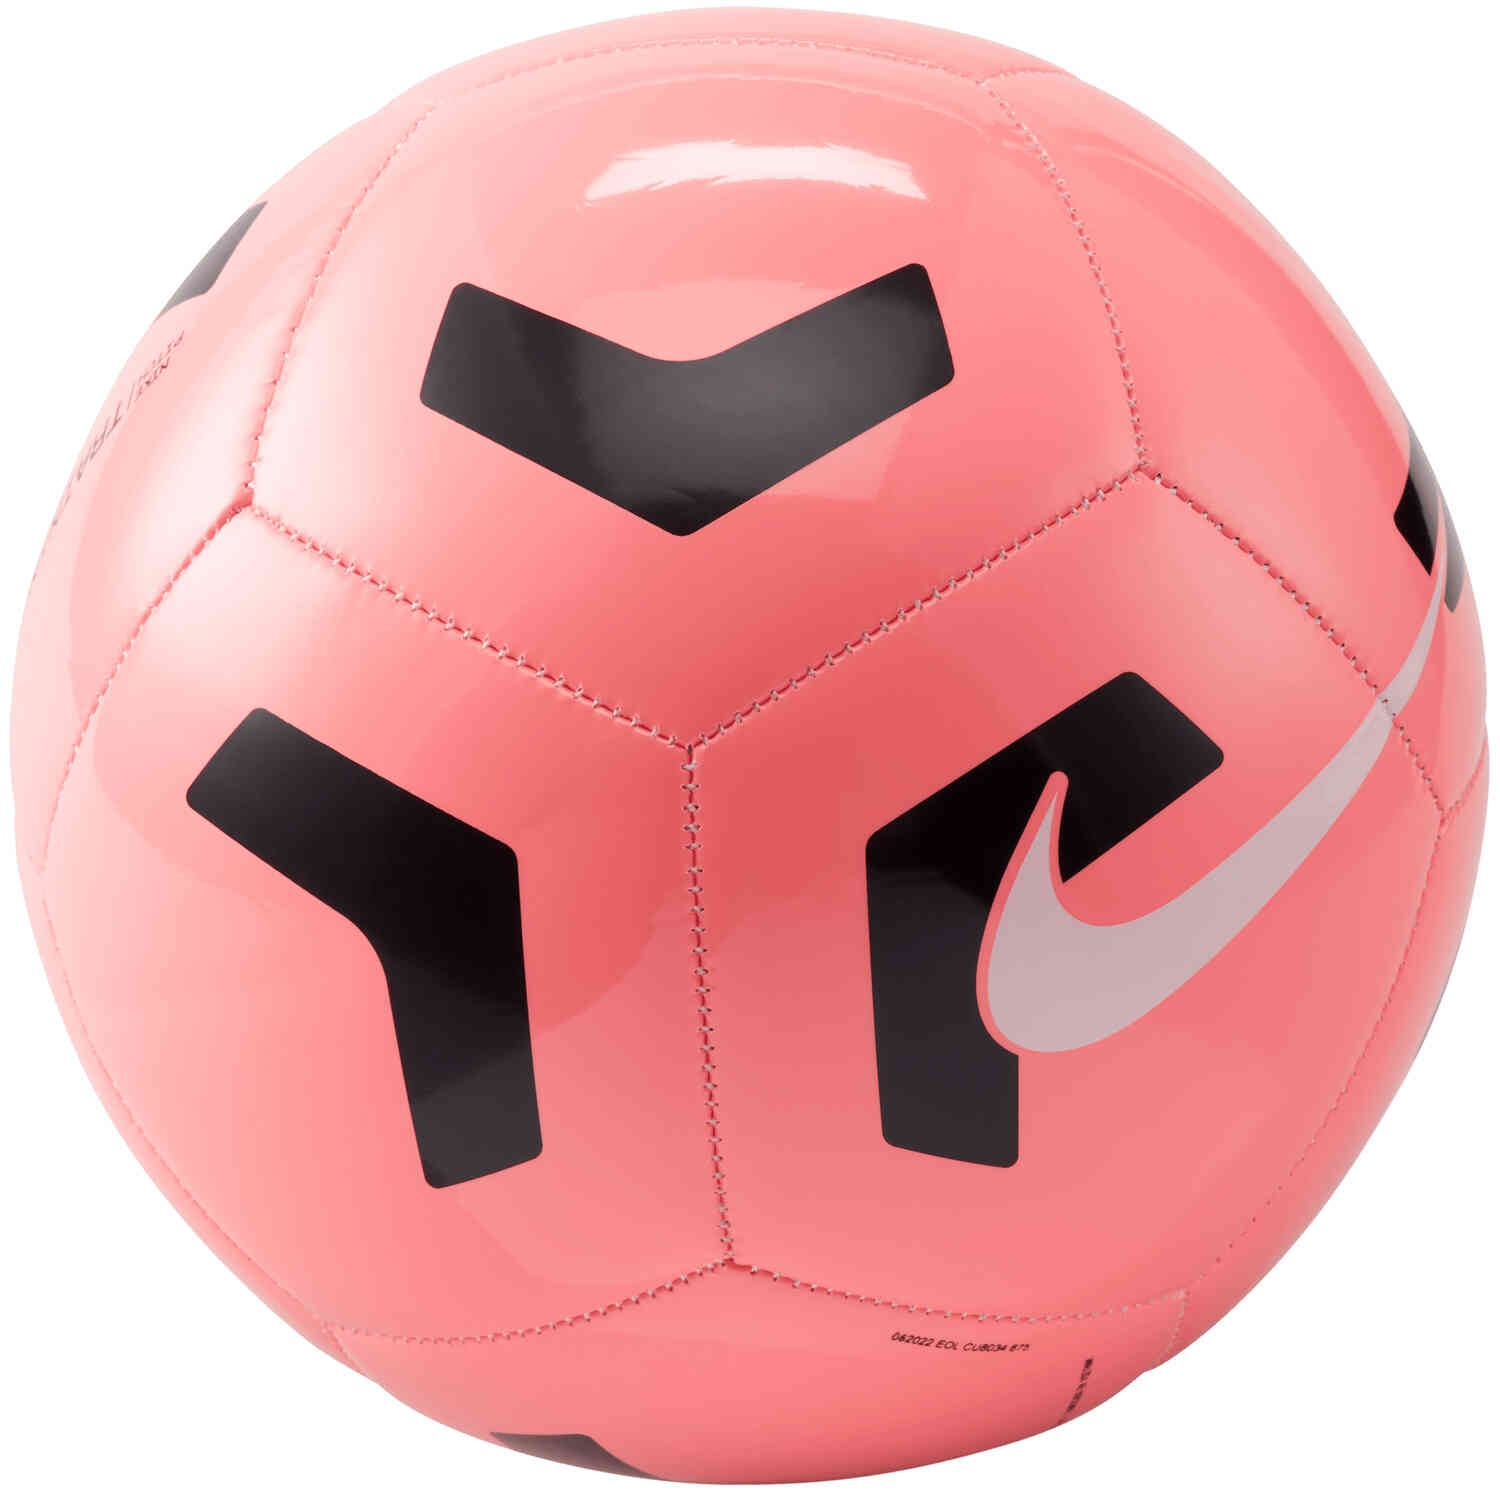 Nike Pitch Training Soccer Ball – Sunset Pulse & Black with White